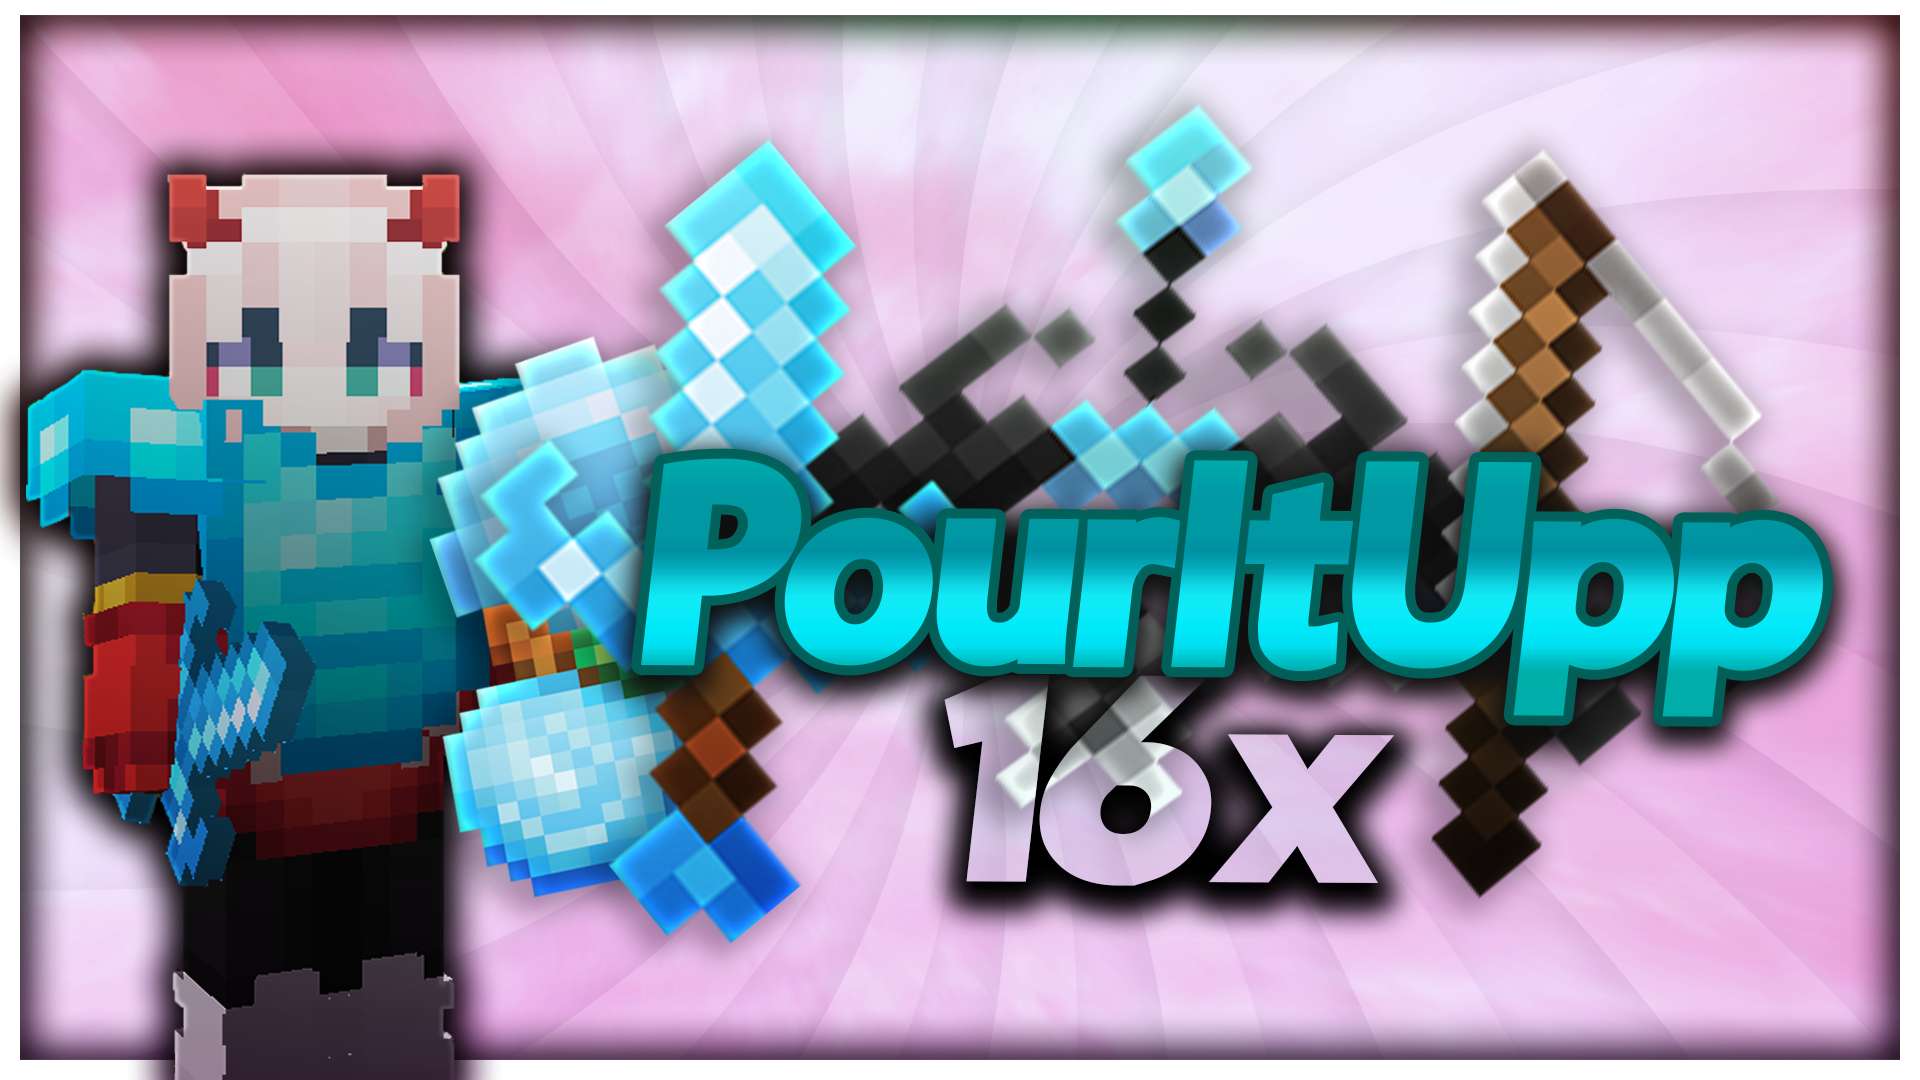 PourItUpp! 16x by NVU on PvPRP